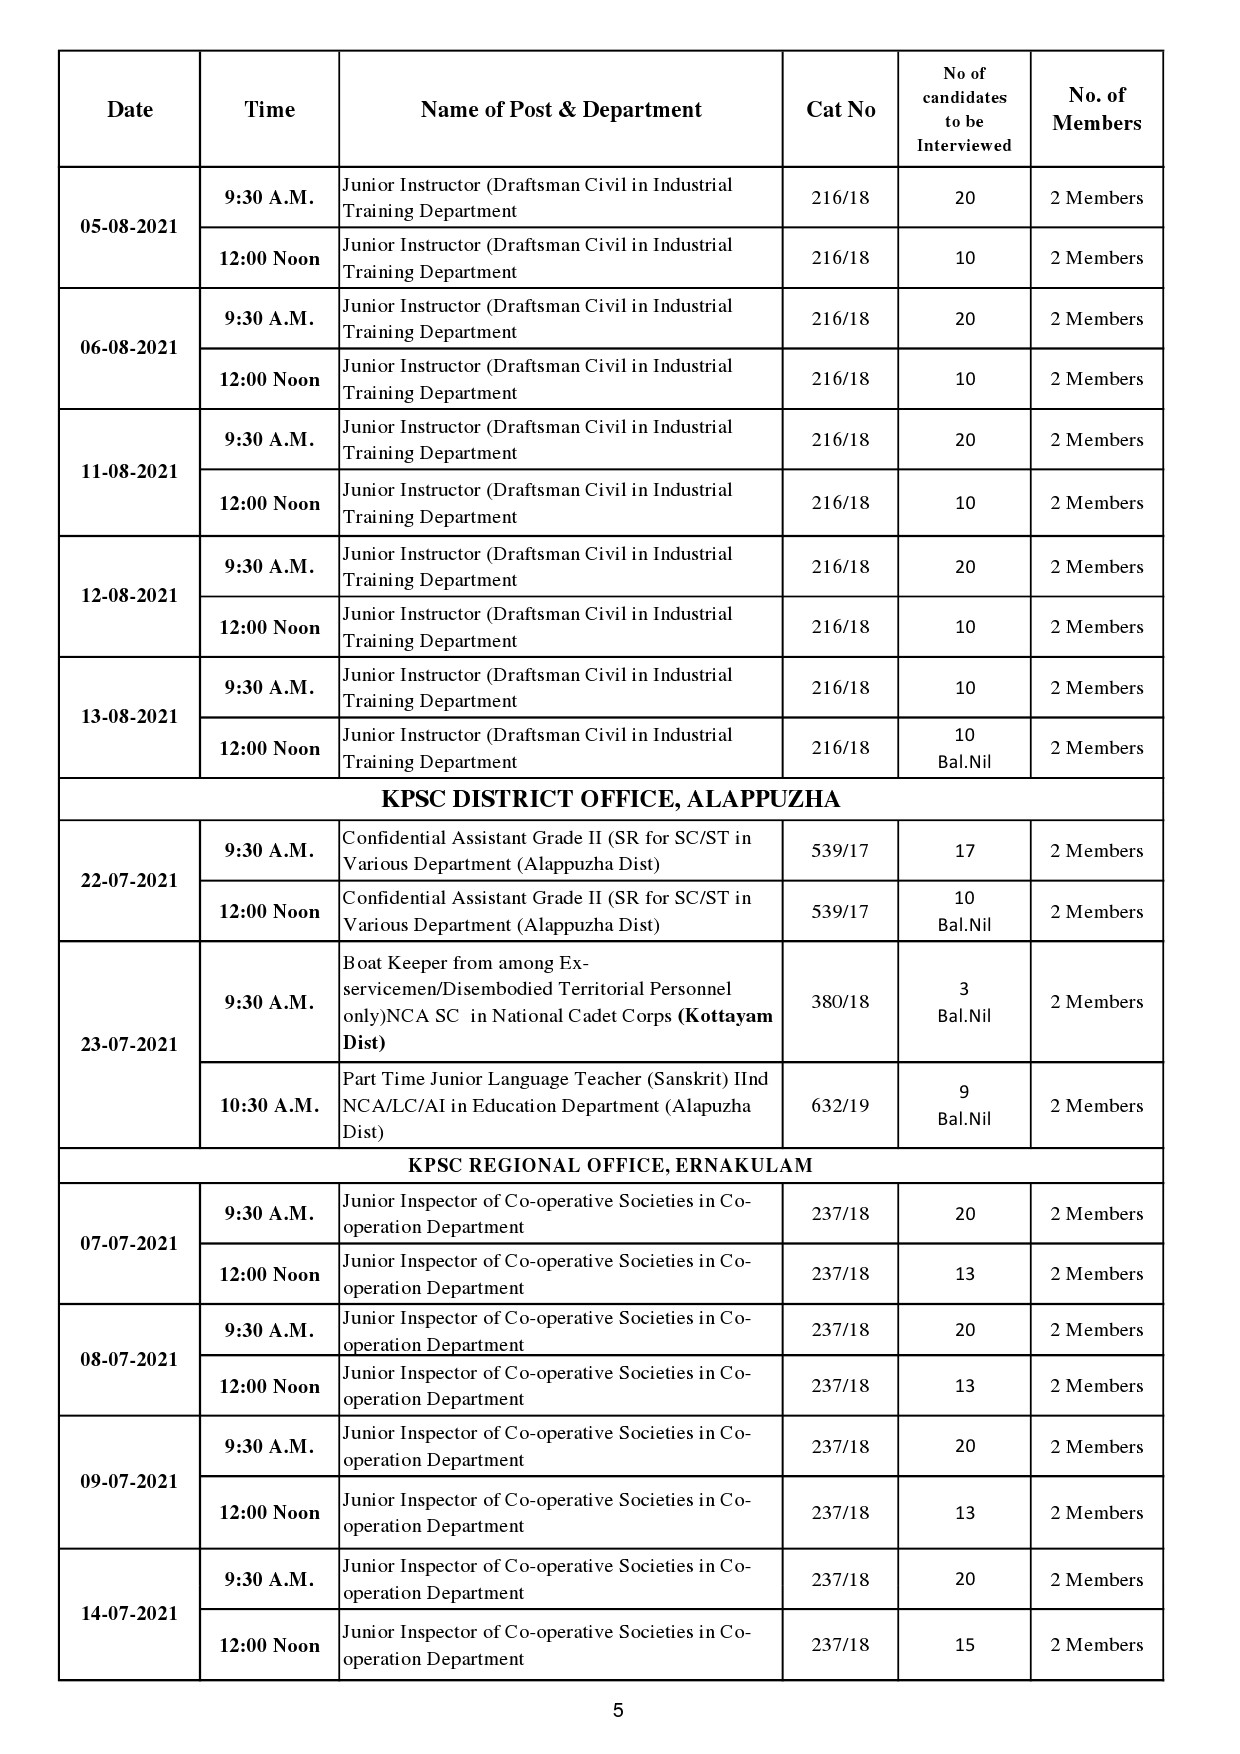 KPSC Interview Programme Of July And August 2021 - Notification Image 5